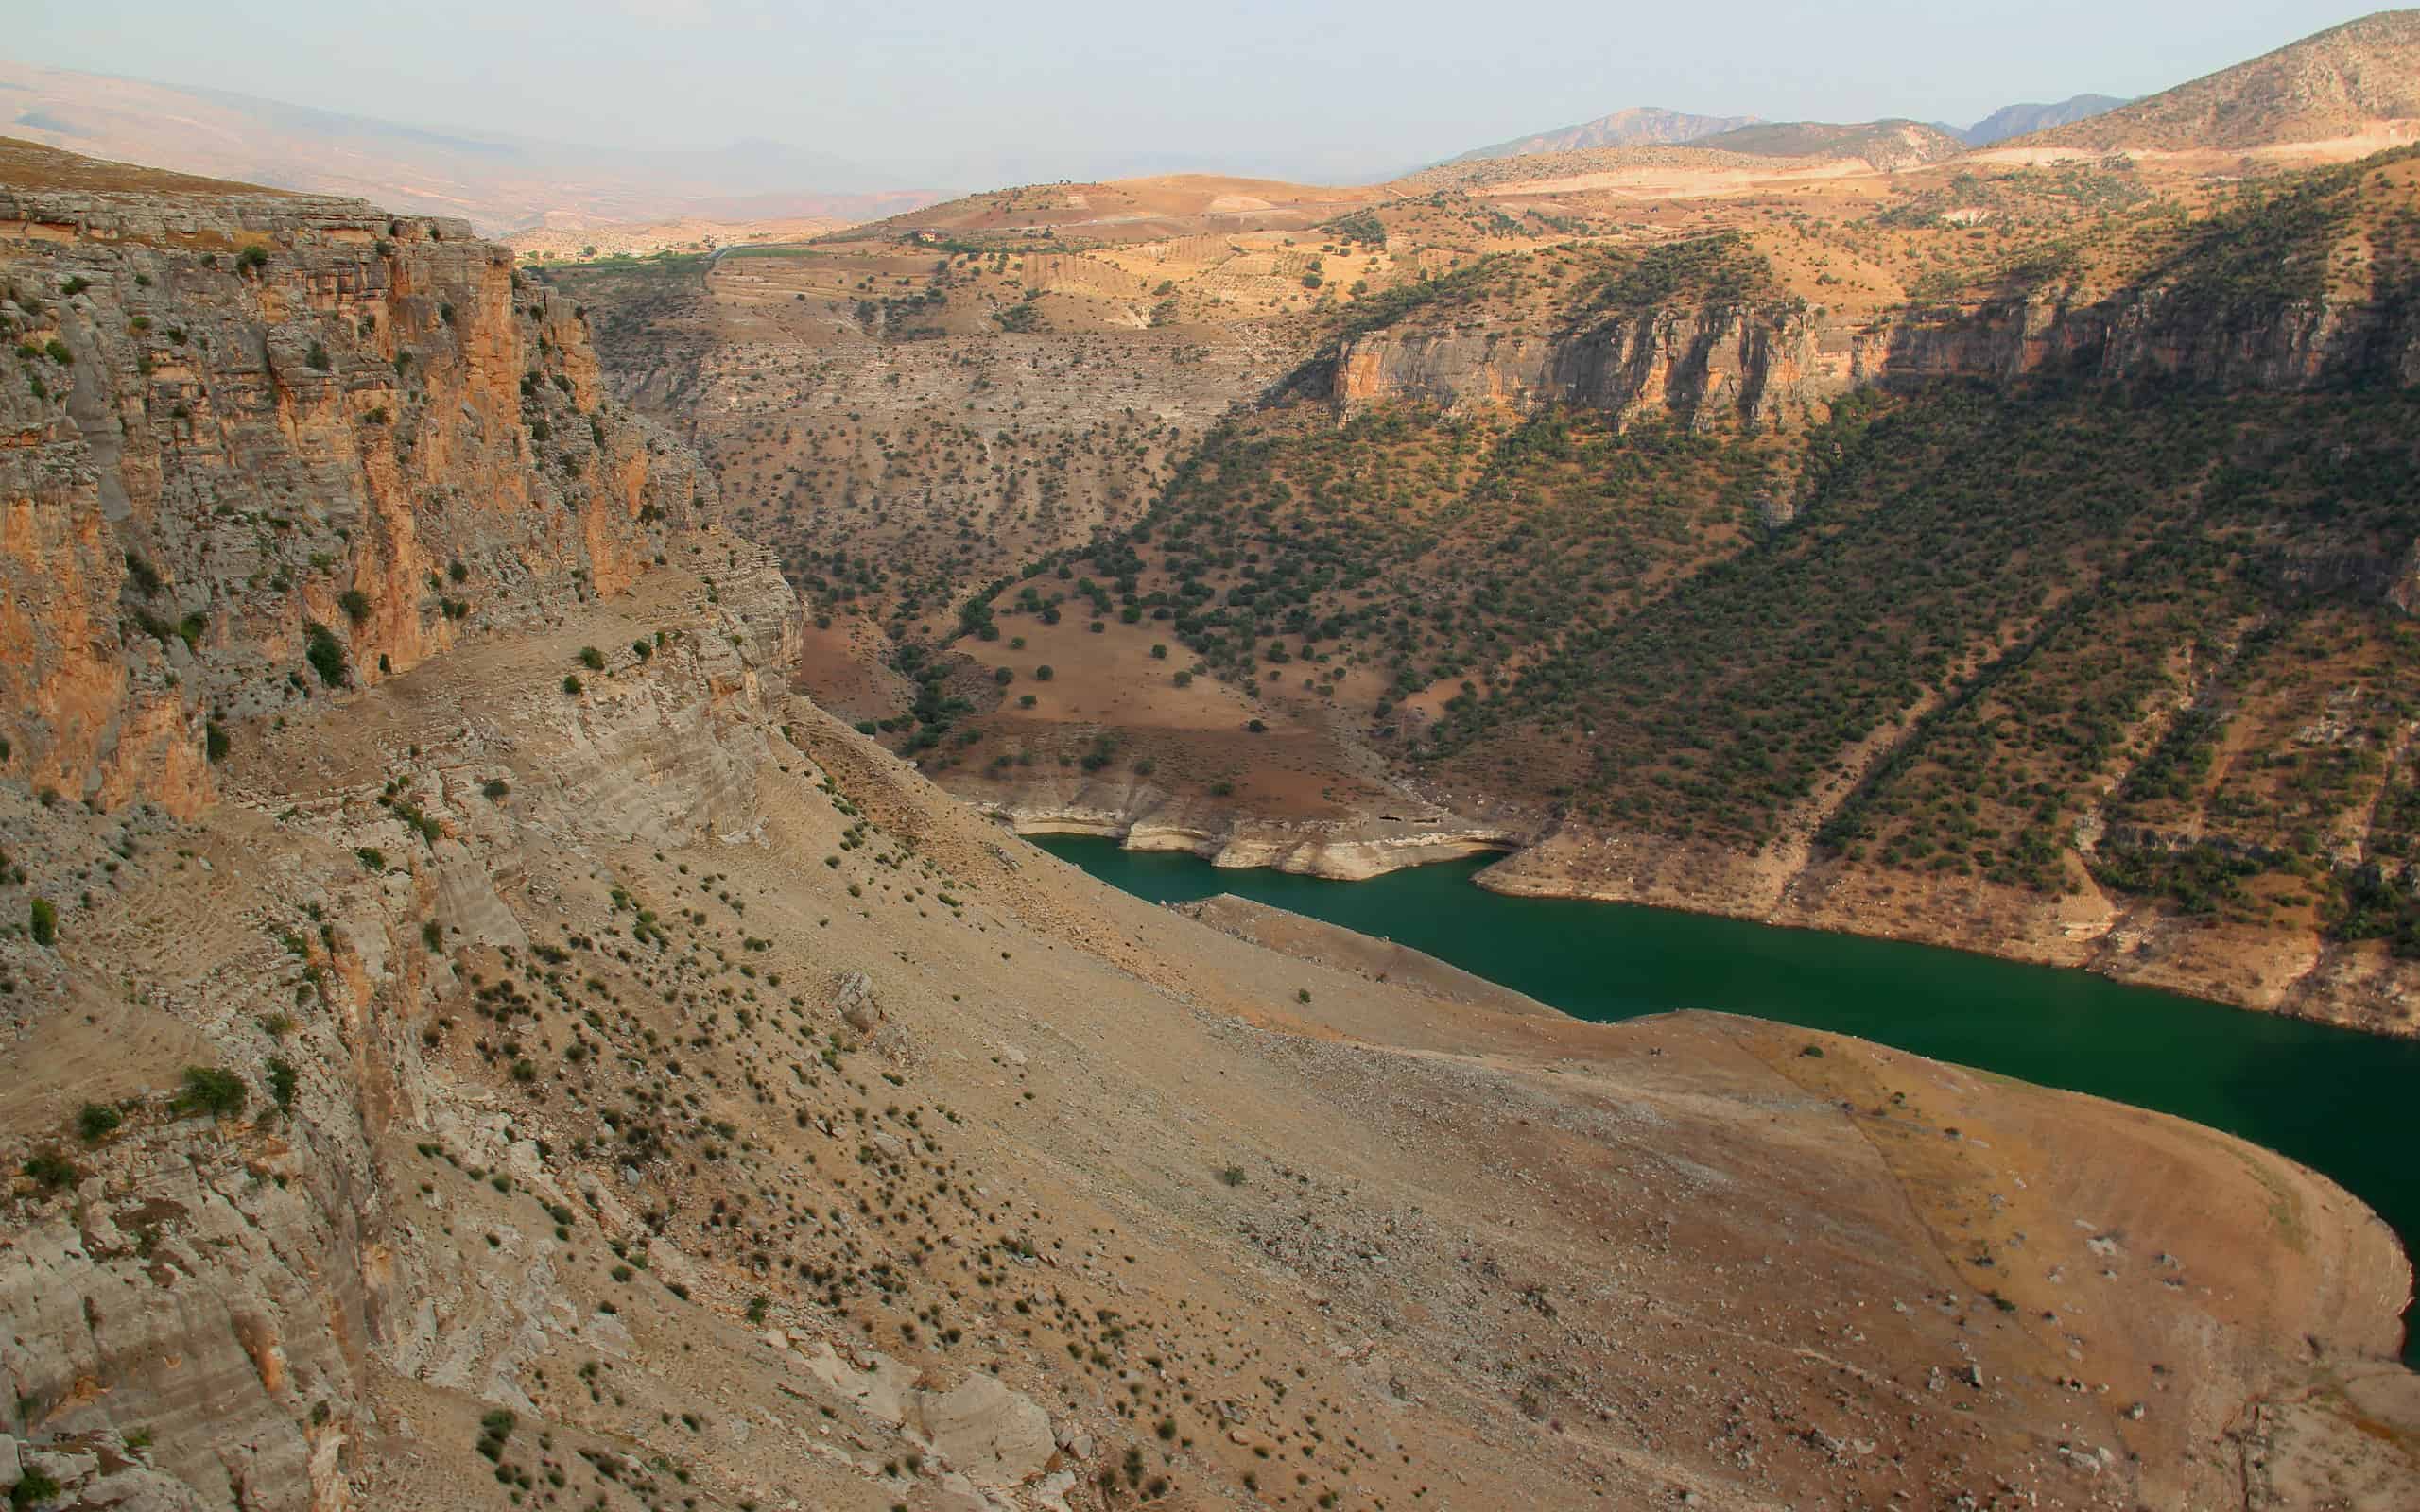 A mountain canyon and the Botan River in the national park near the city of Siirt in the Southeast Anatolia region